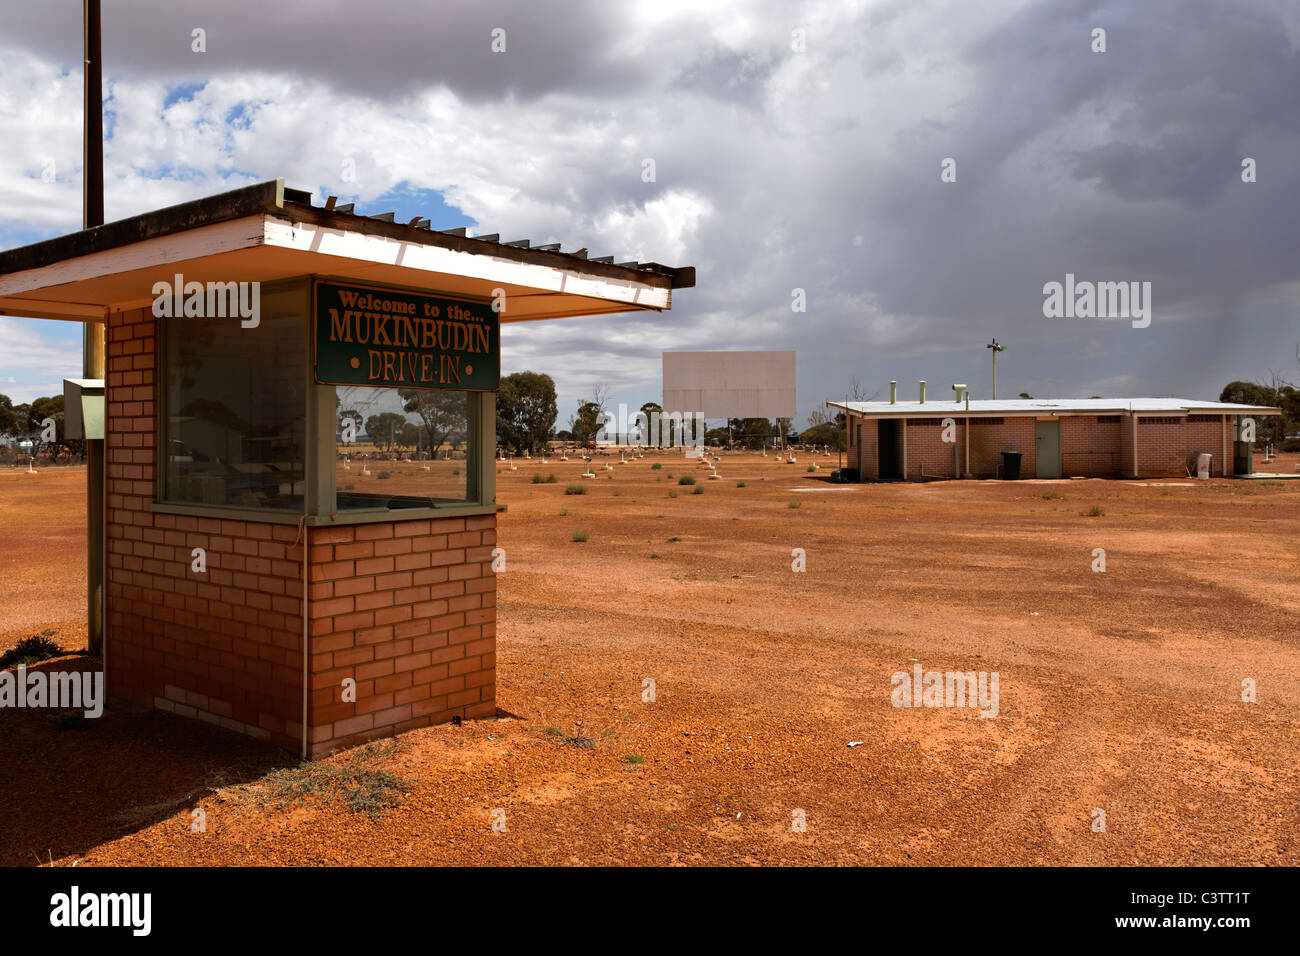 Old Drive in picture theater, Mukinbudin Western Australia Stock Photo